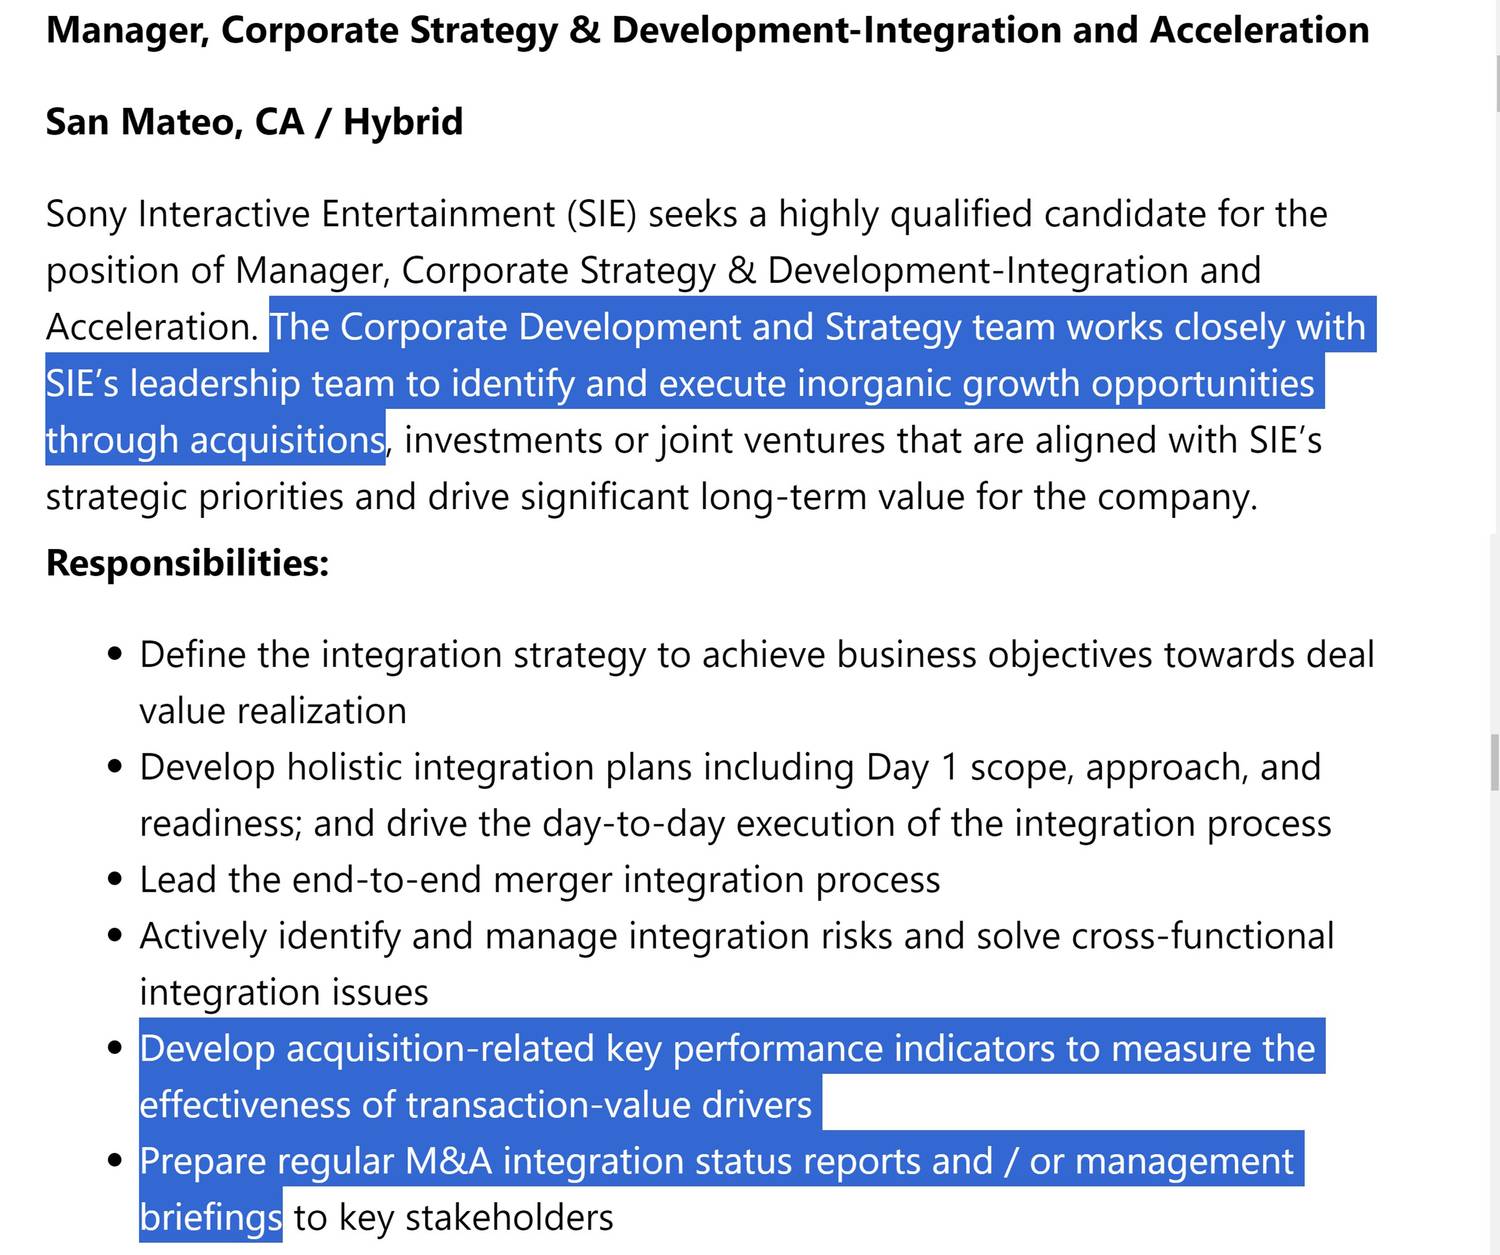 sony-playstation-job-ad-for-manager-at-corporate-strategy-development-integration-and-acceleration-division-excerpts.jpg